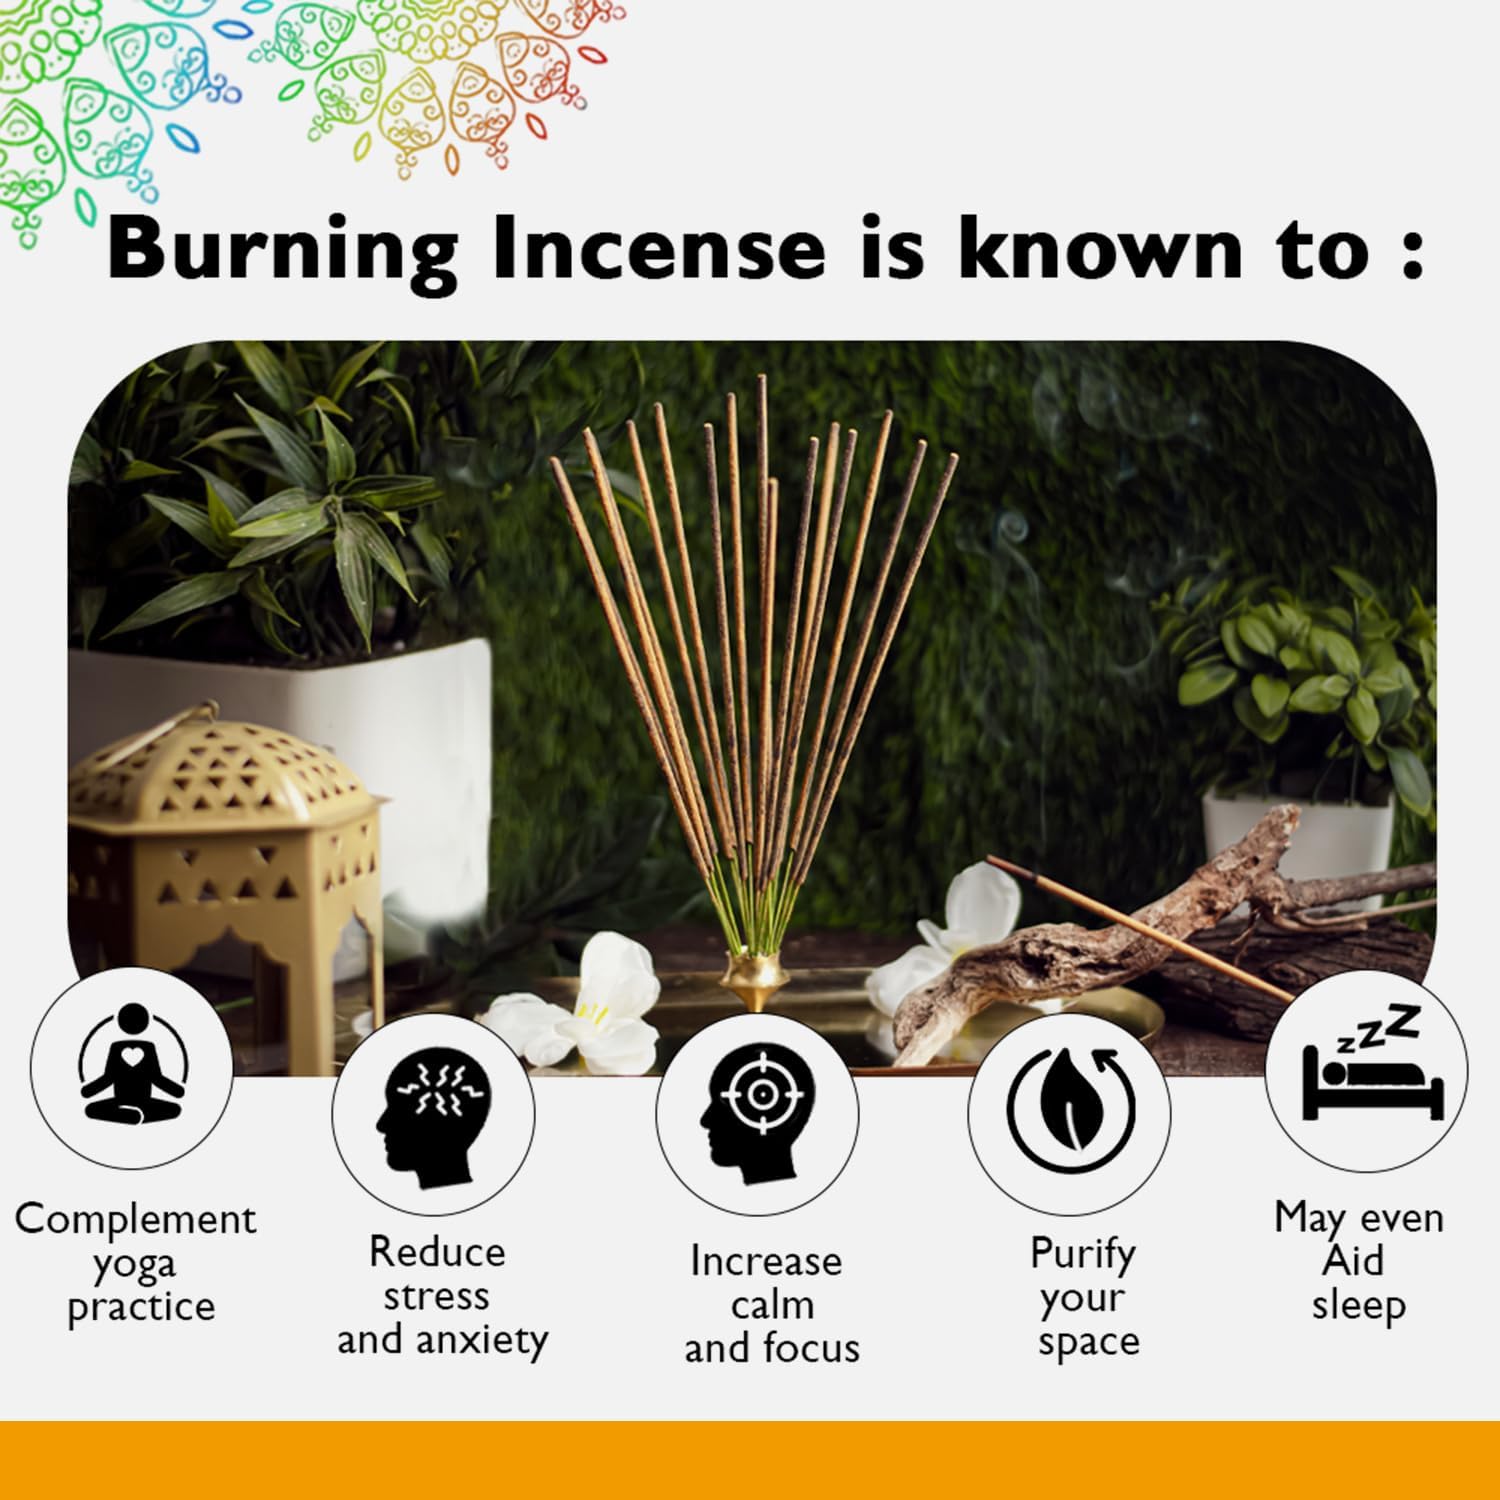 Simply Vedic White Sage Incense Sticks 250-Grams (Approx 135 Premium Sticks + Holder) | Lasts 45-Minutes, Ideal for Meditation, Yoga, Spiritual Healing, Aromatherapy Energy Cleansing.